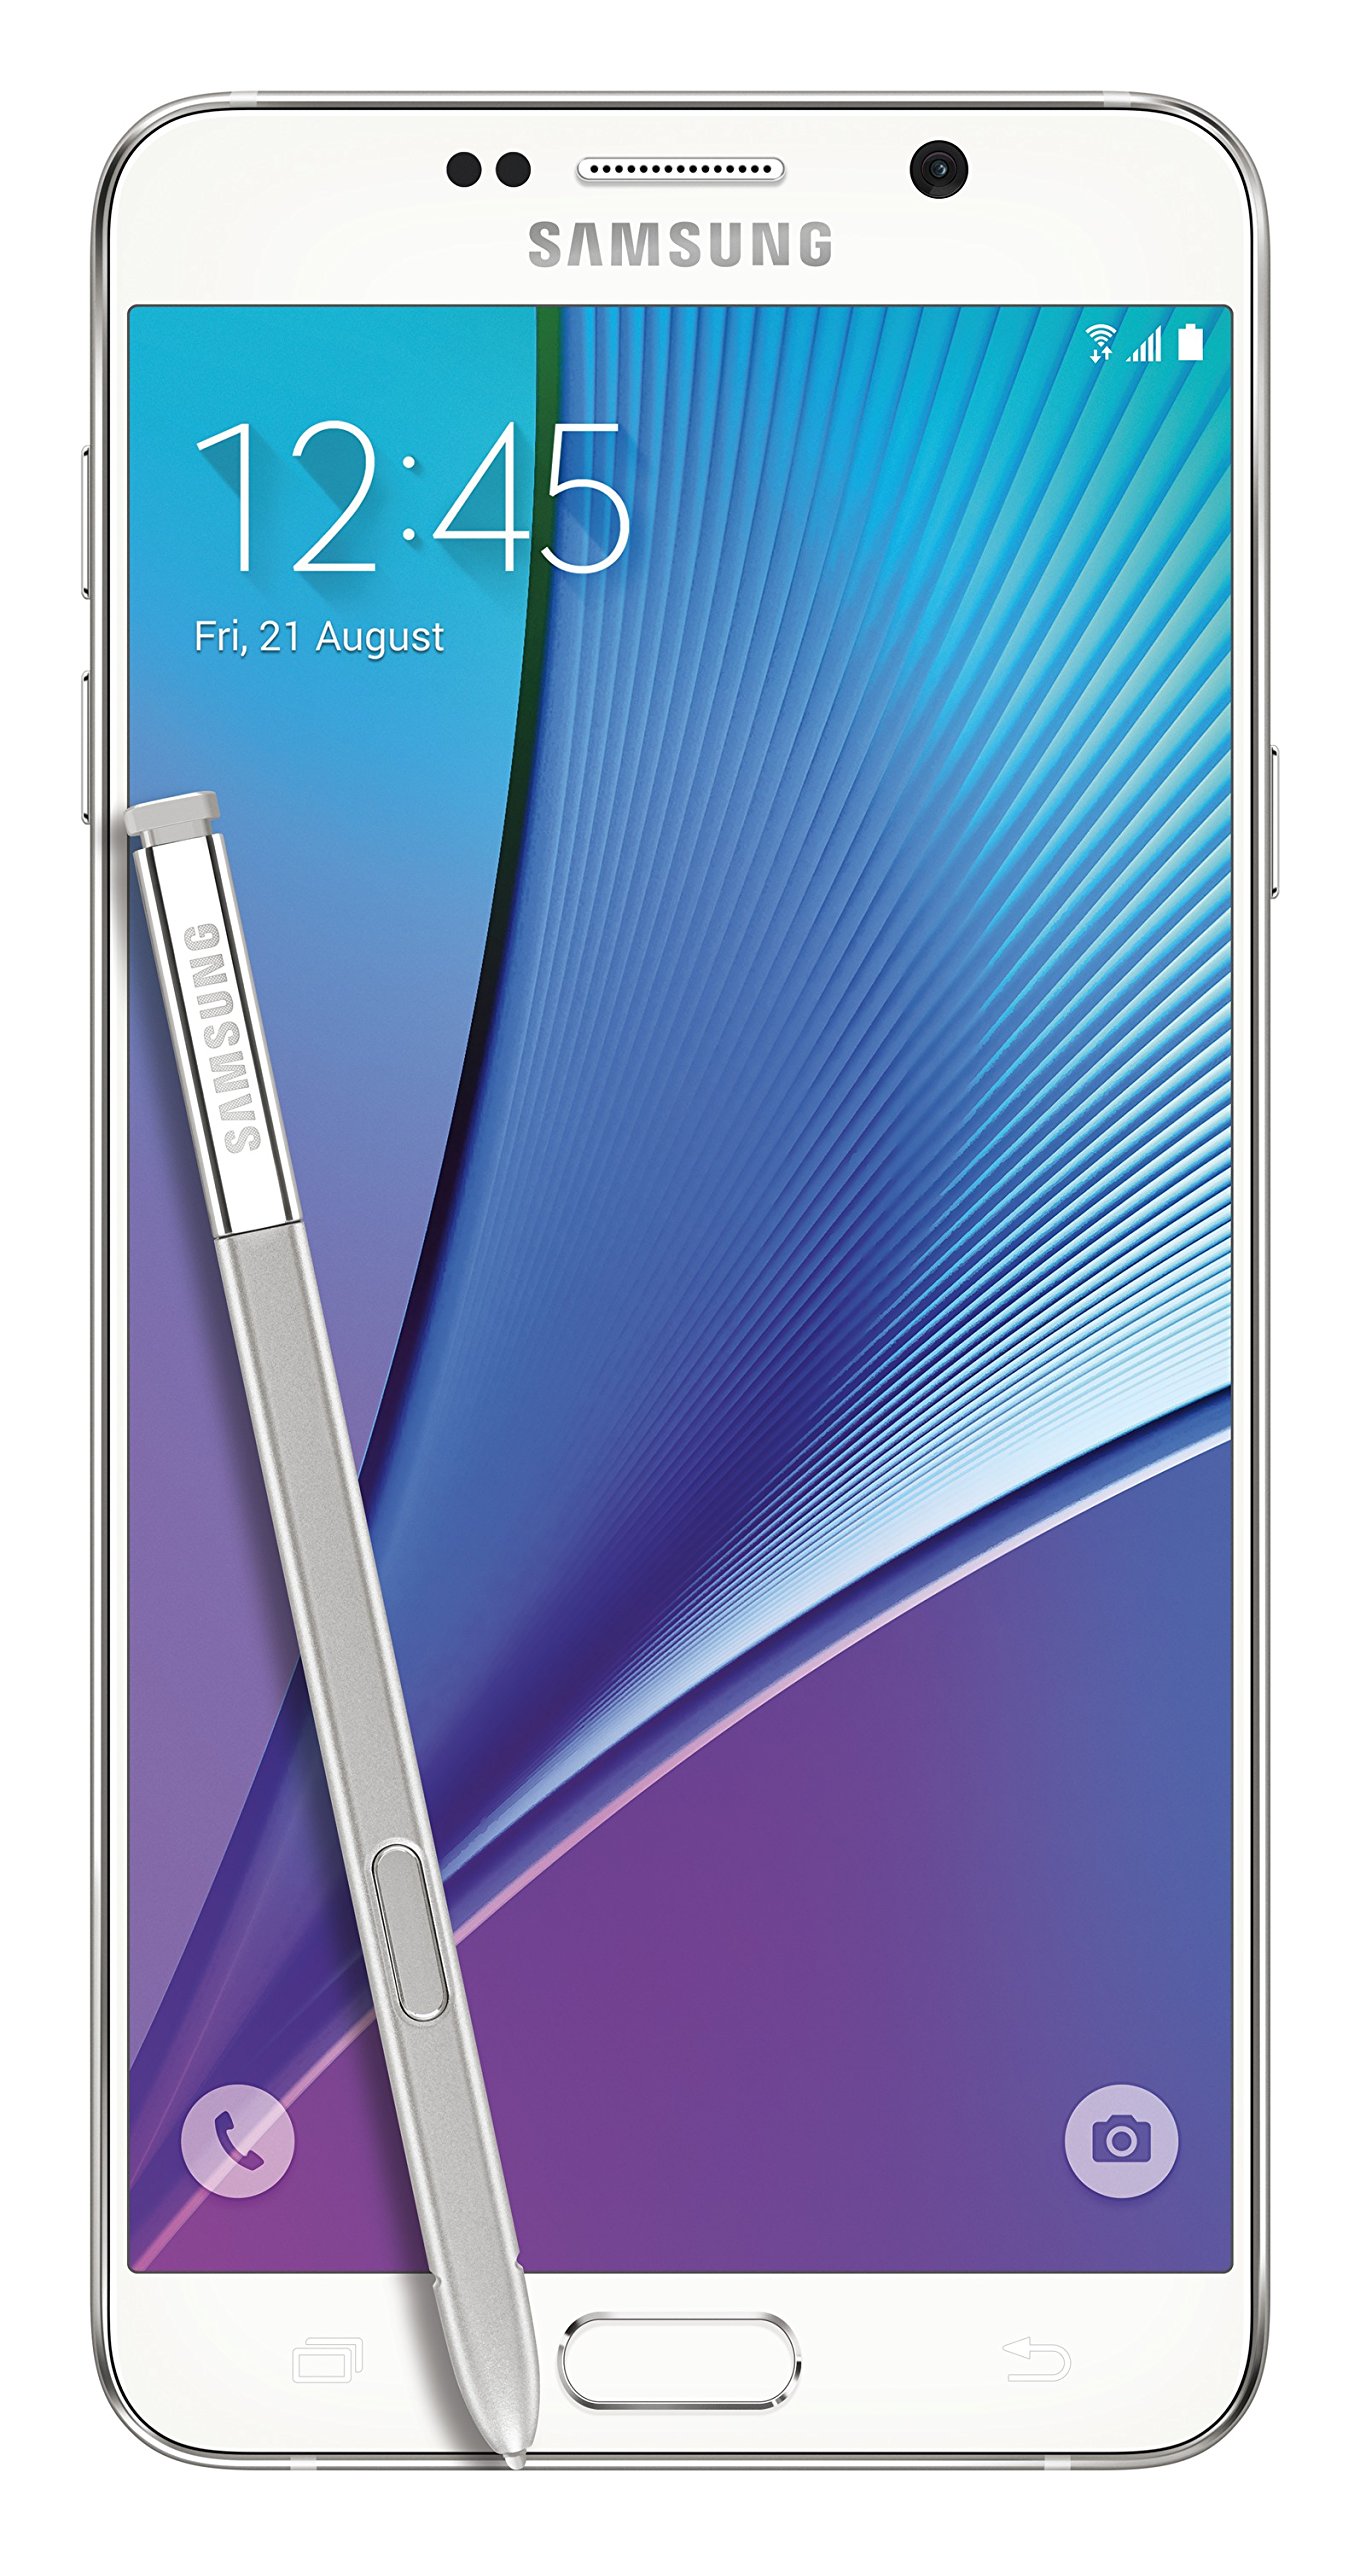 Samsung Galaxy Note 5, White  32GB (AT&T)